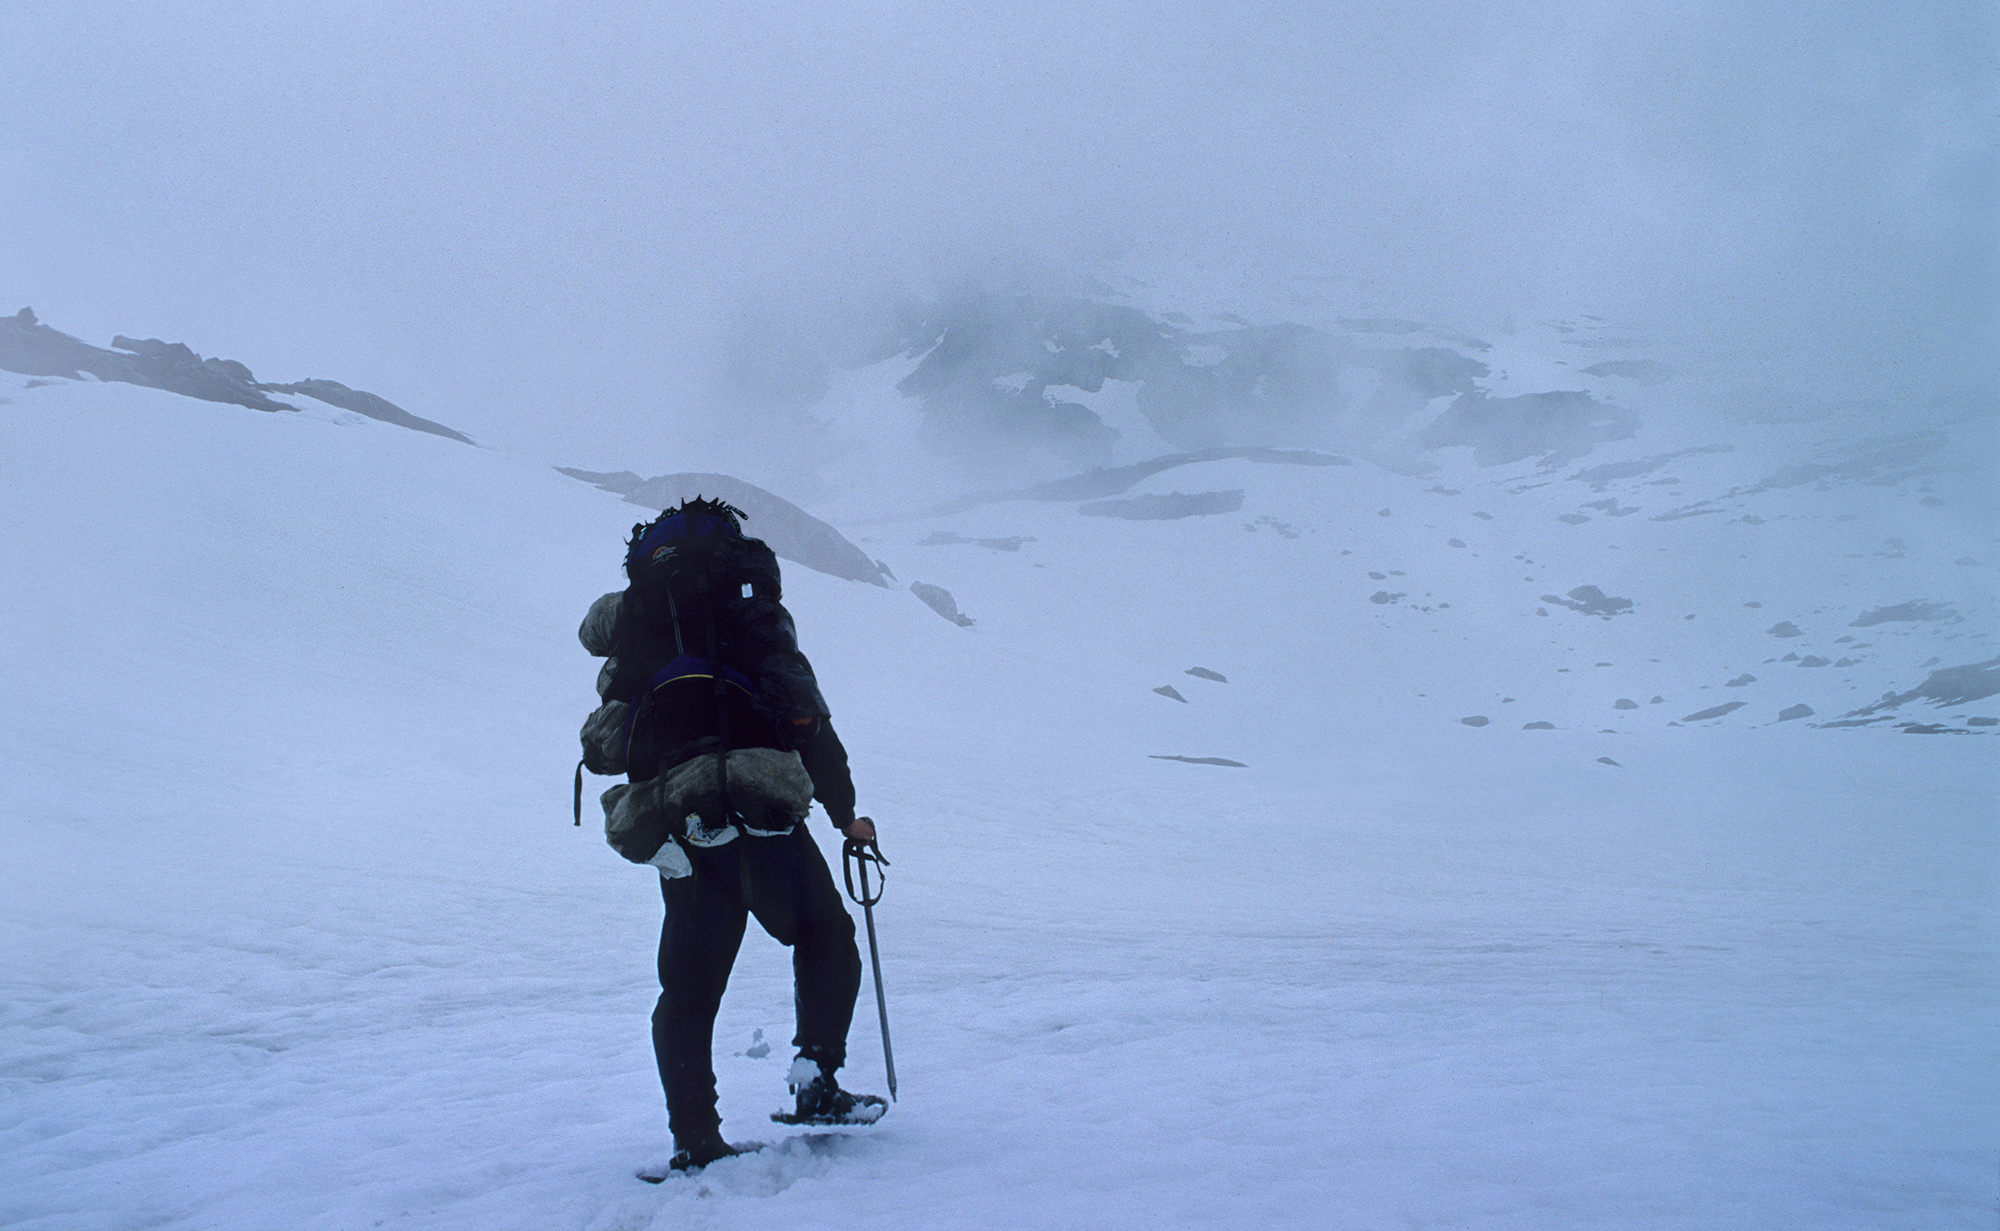 Snowshoeing into the Norwegian wild April 26 1998. On Sacred Ground by Andrew Terrill.